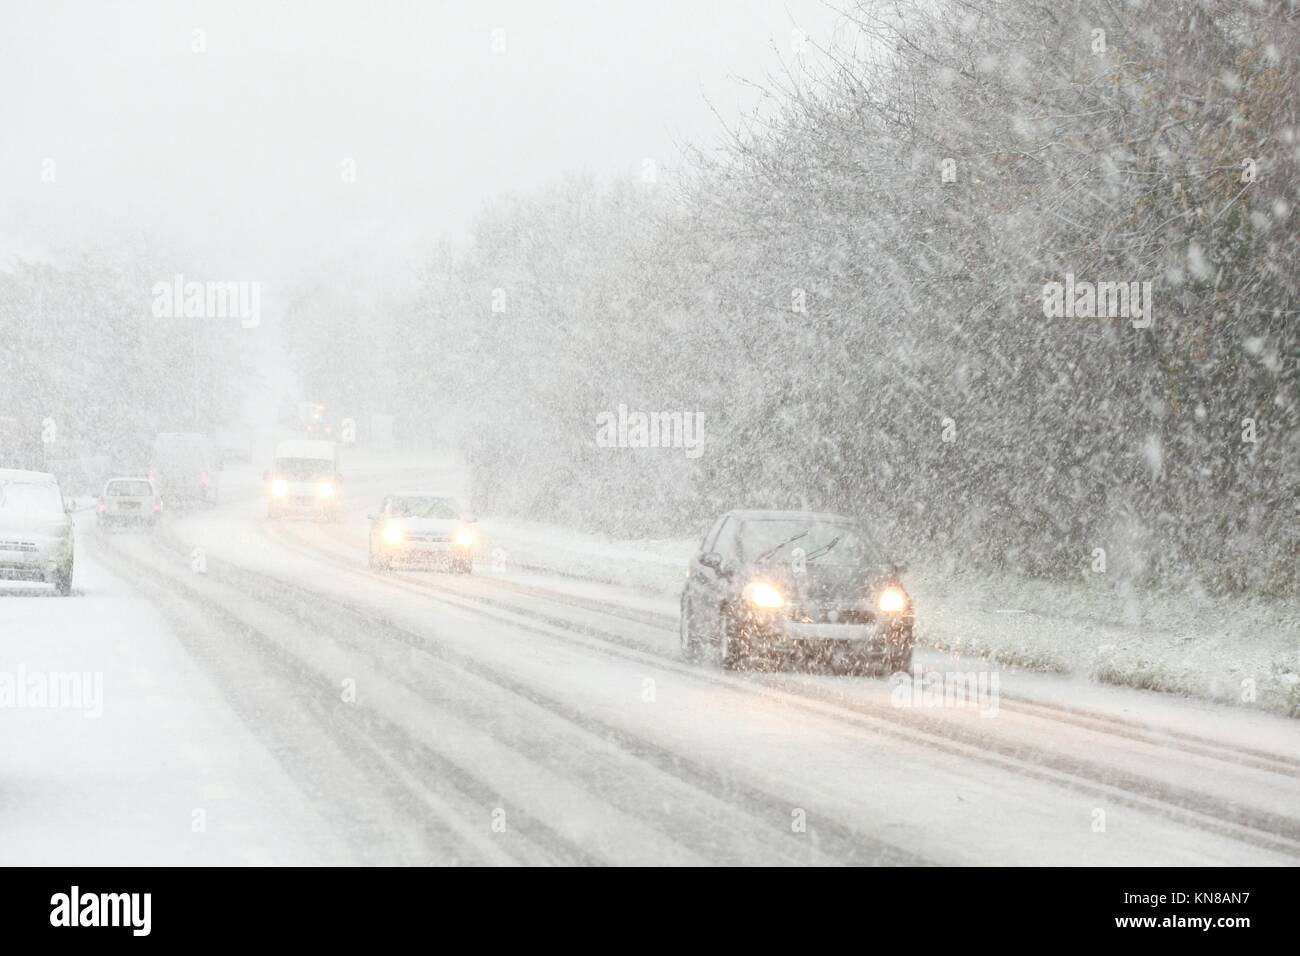 Cars driving in heavy snow falling in winter, white out, blizzard conditions, hastings, east sussex, uk Stock Photo